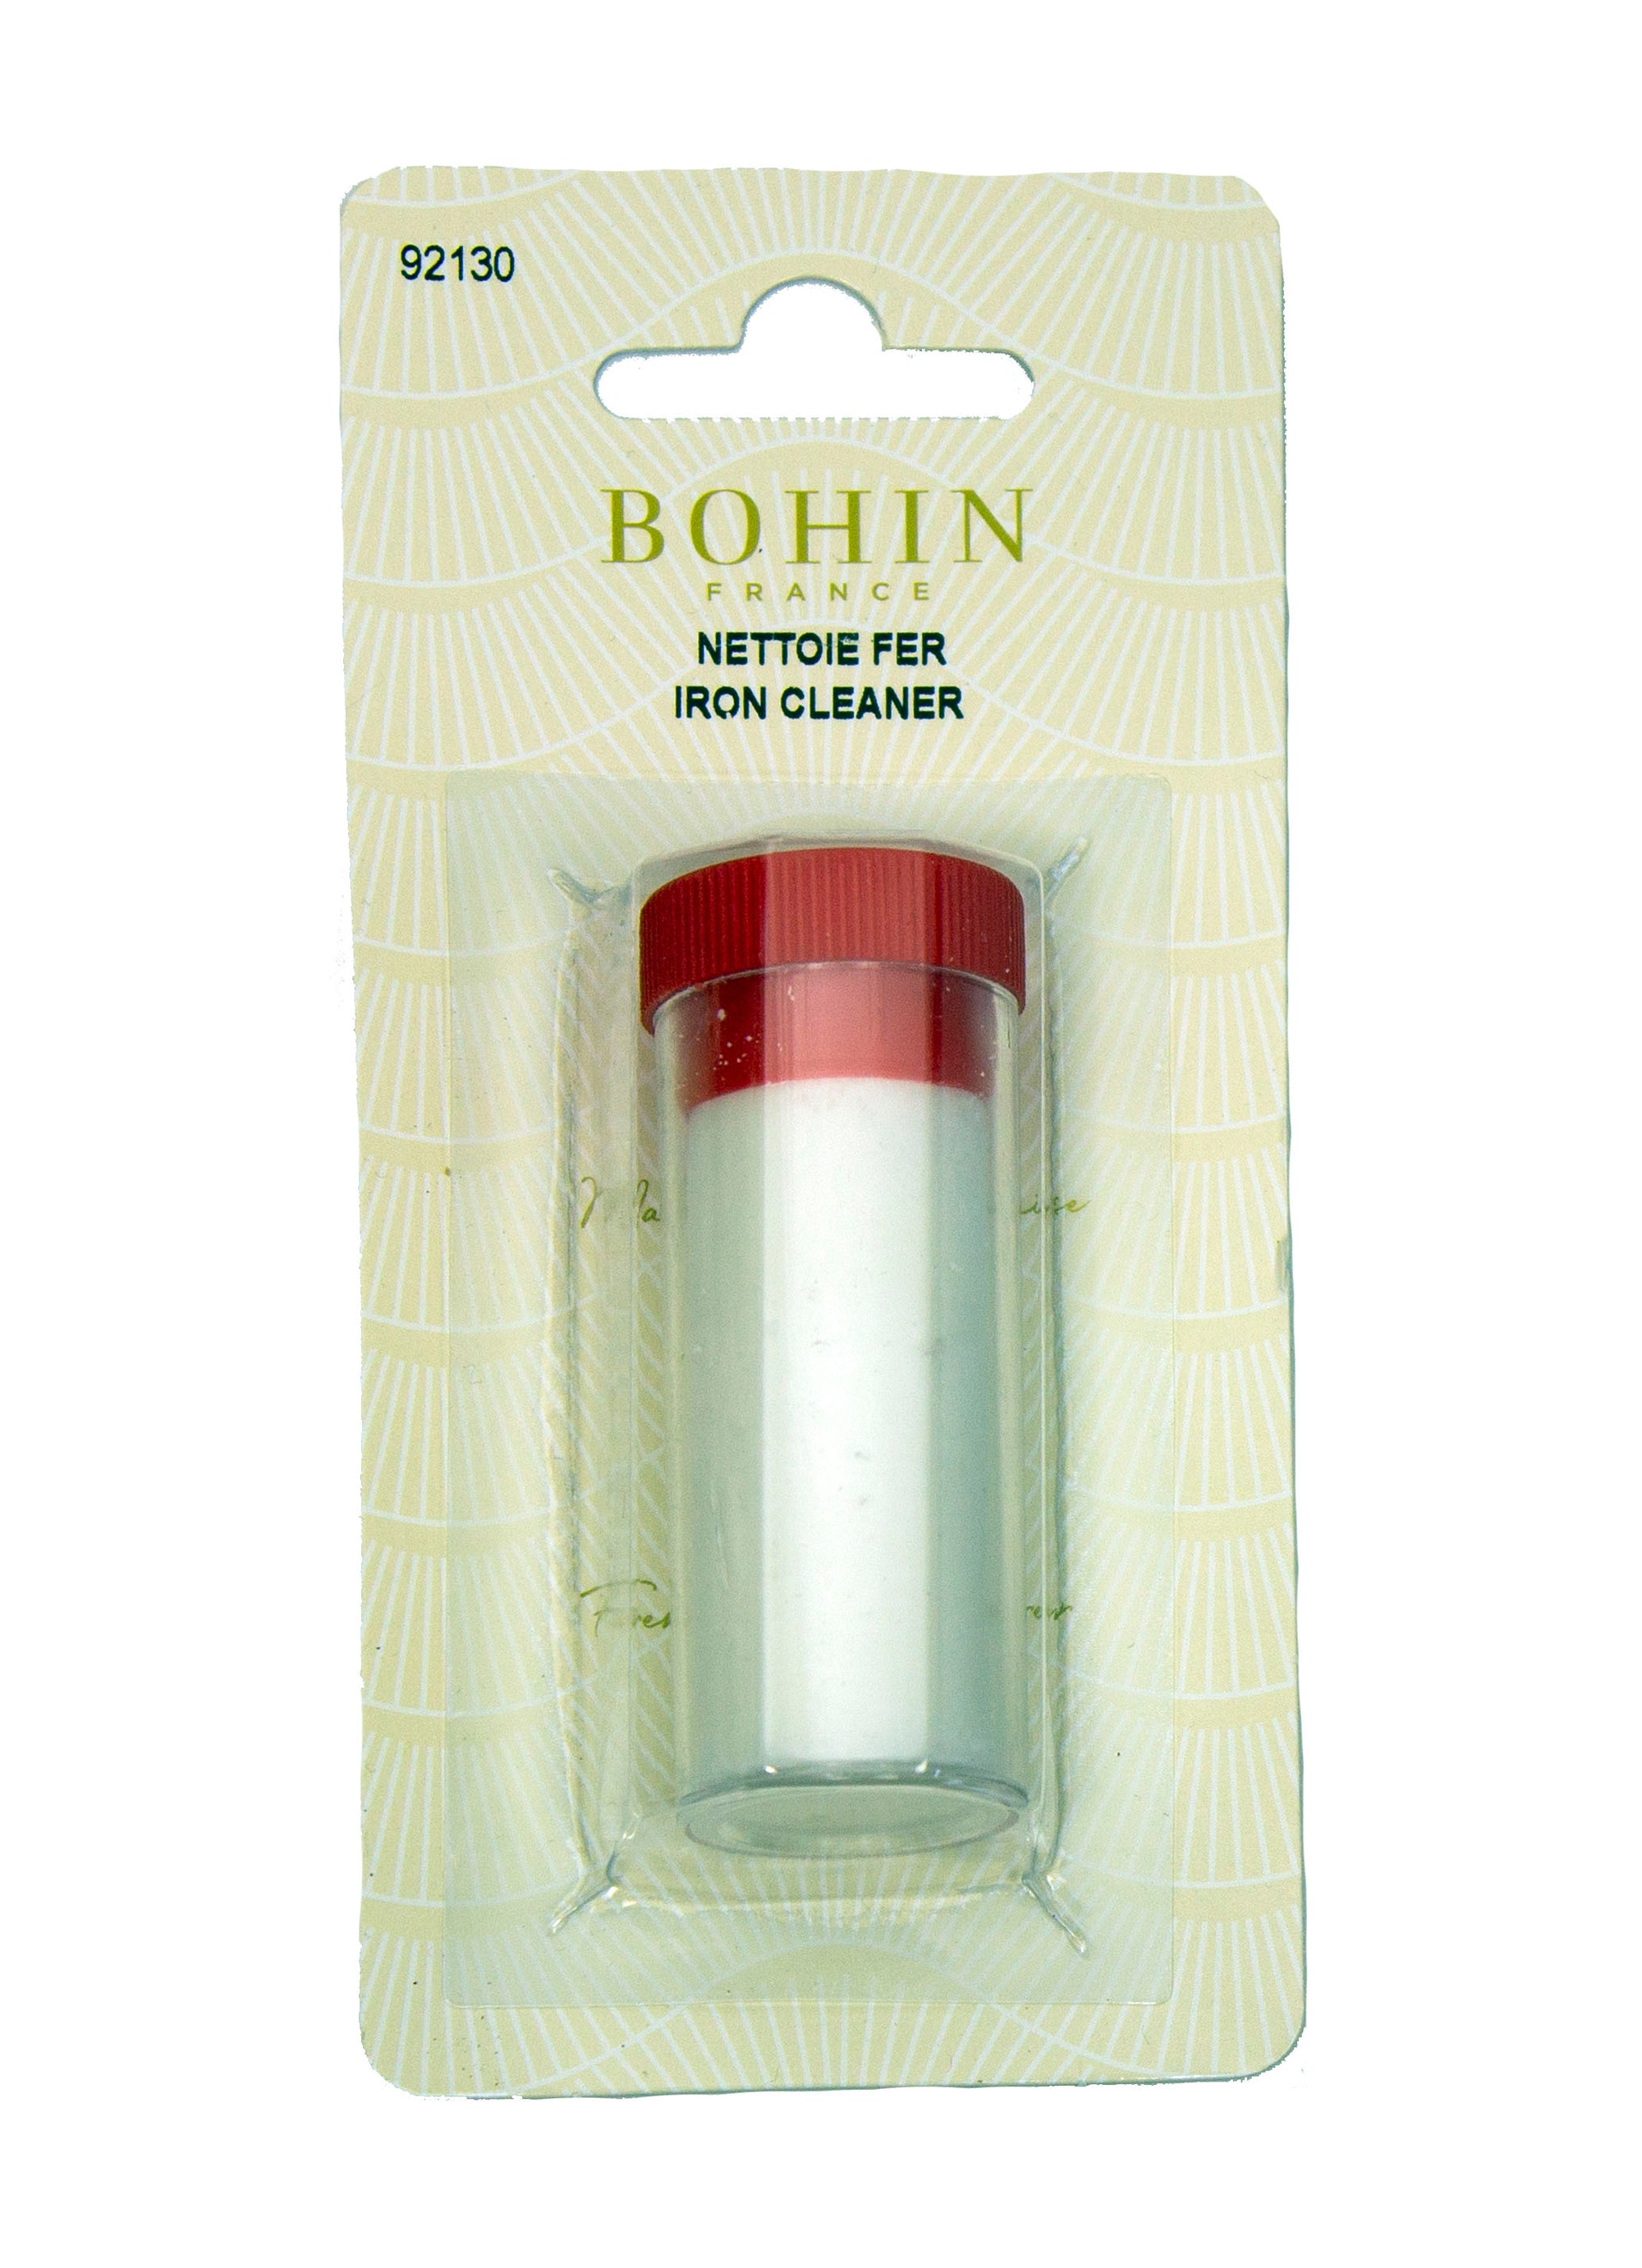 Bohin Iron Cleaner - Hot Iron Cleaning Stick